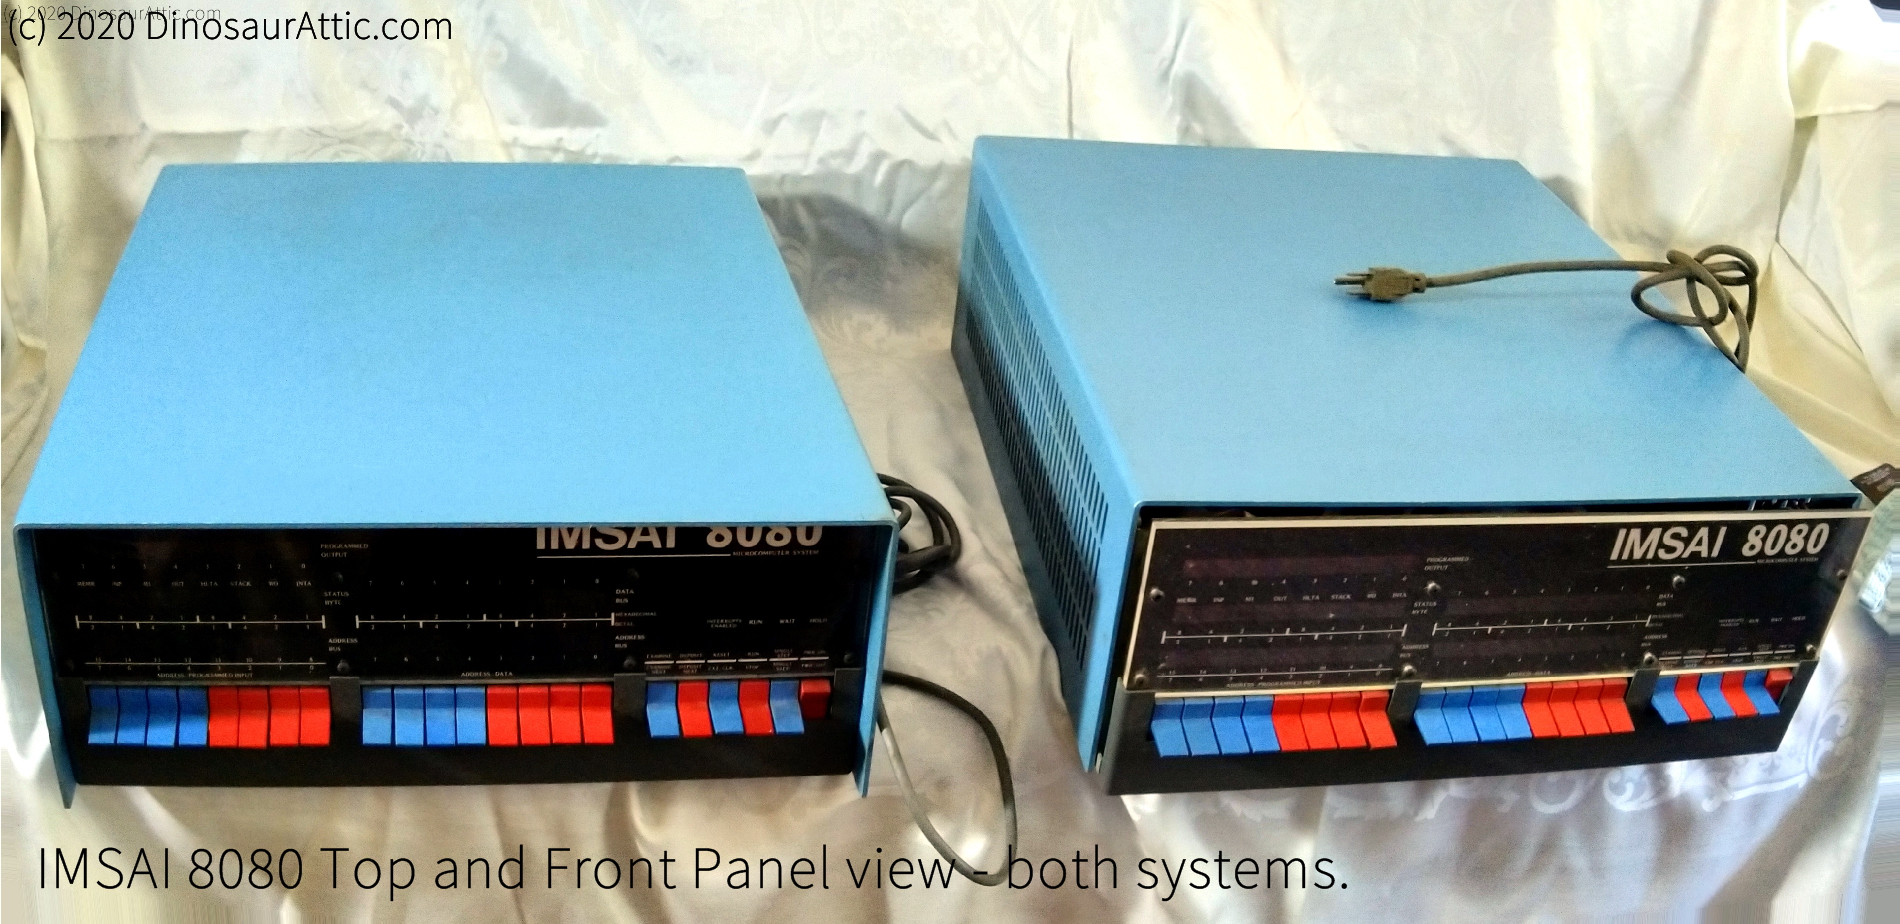 IMSAI 8080 Top and Front Panel view - both systems.